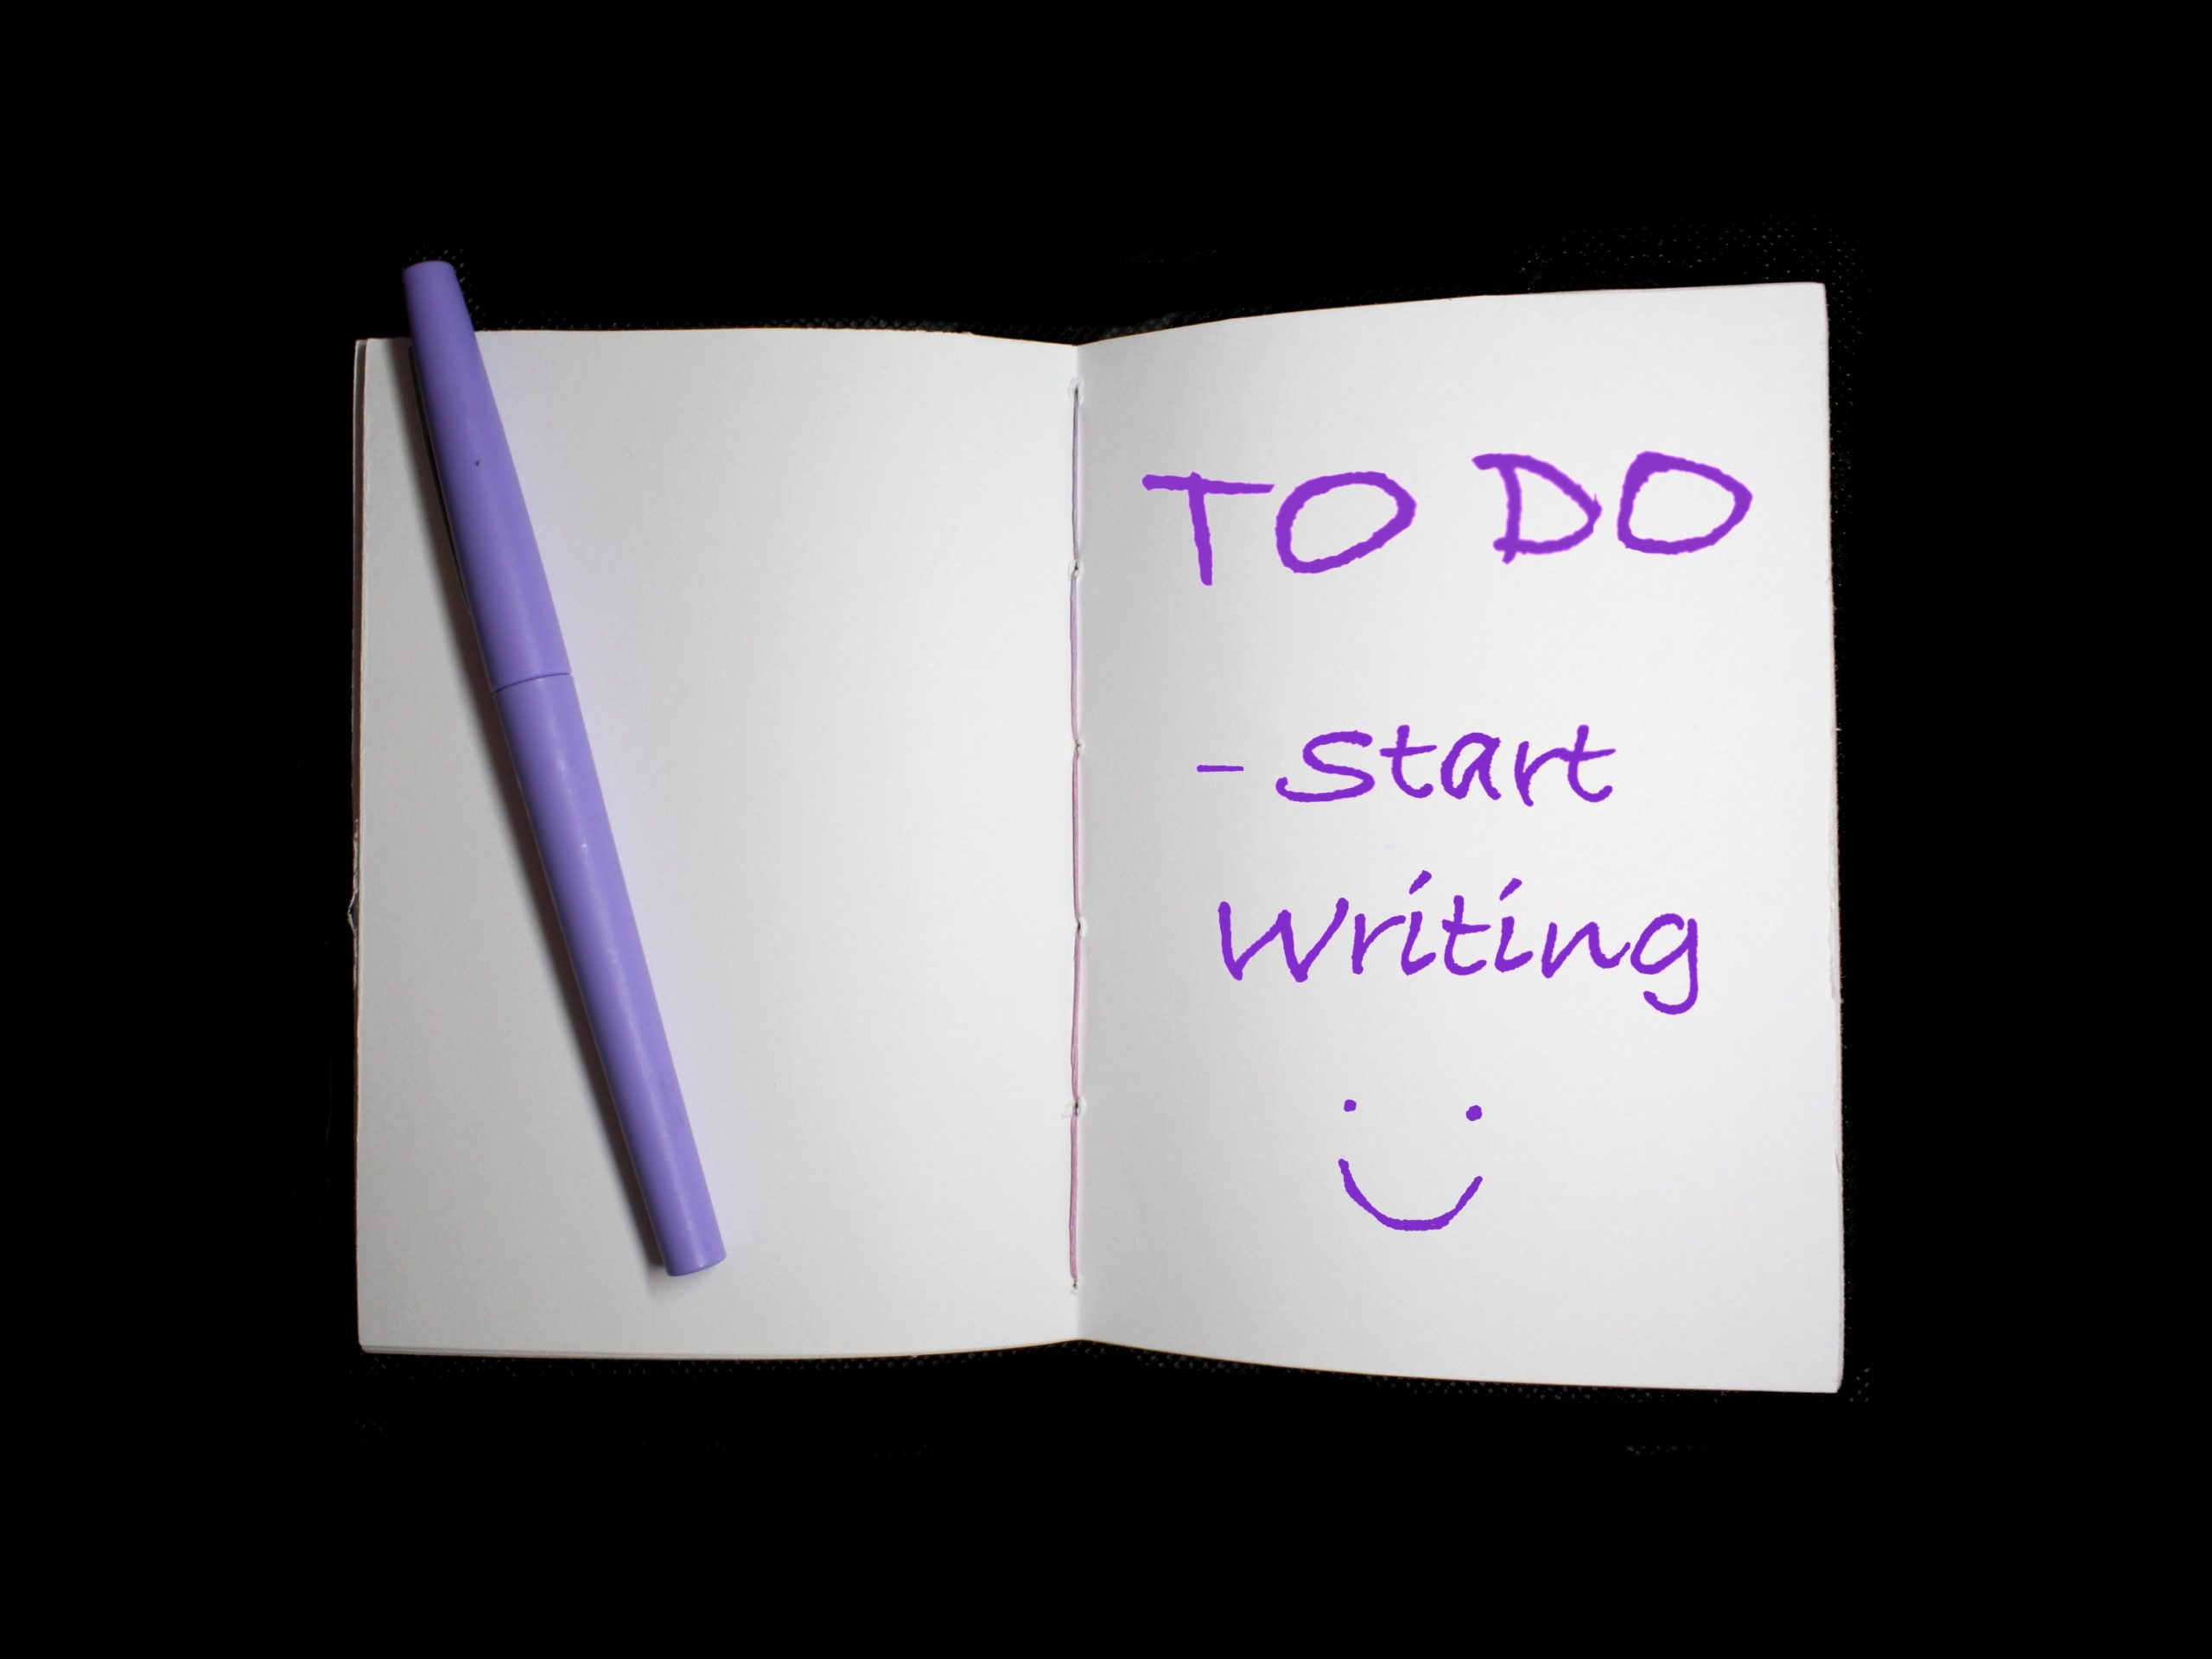 notebook open to "to do - start writing"